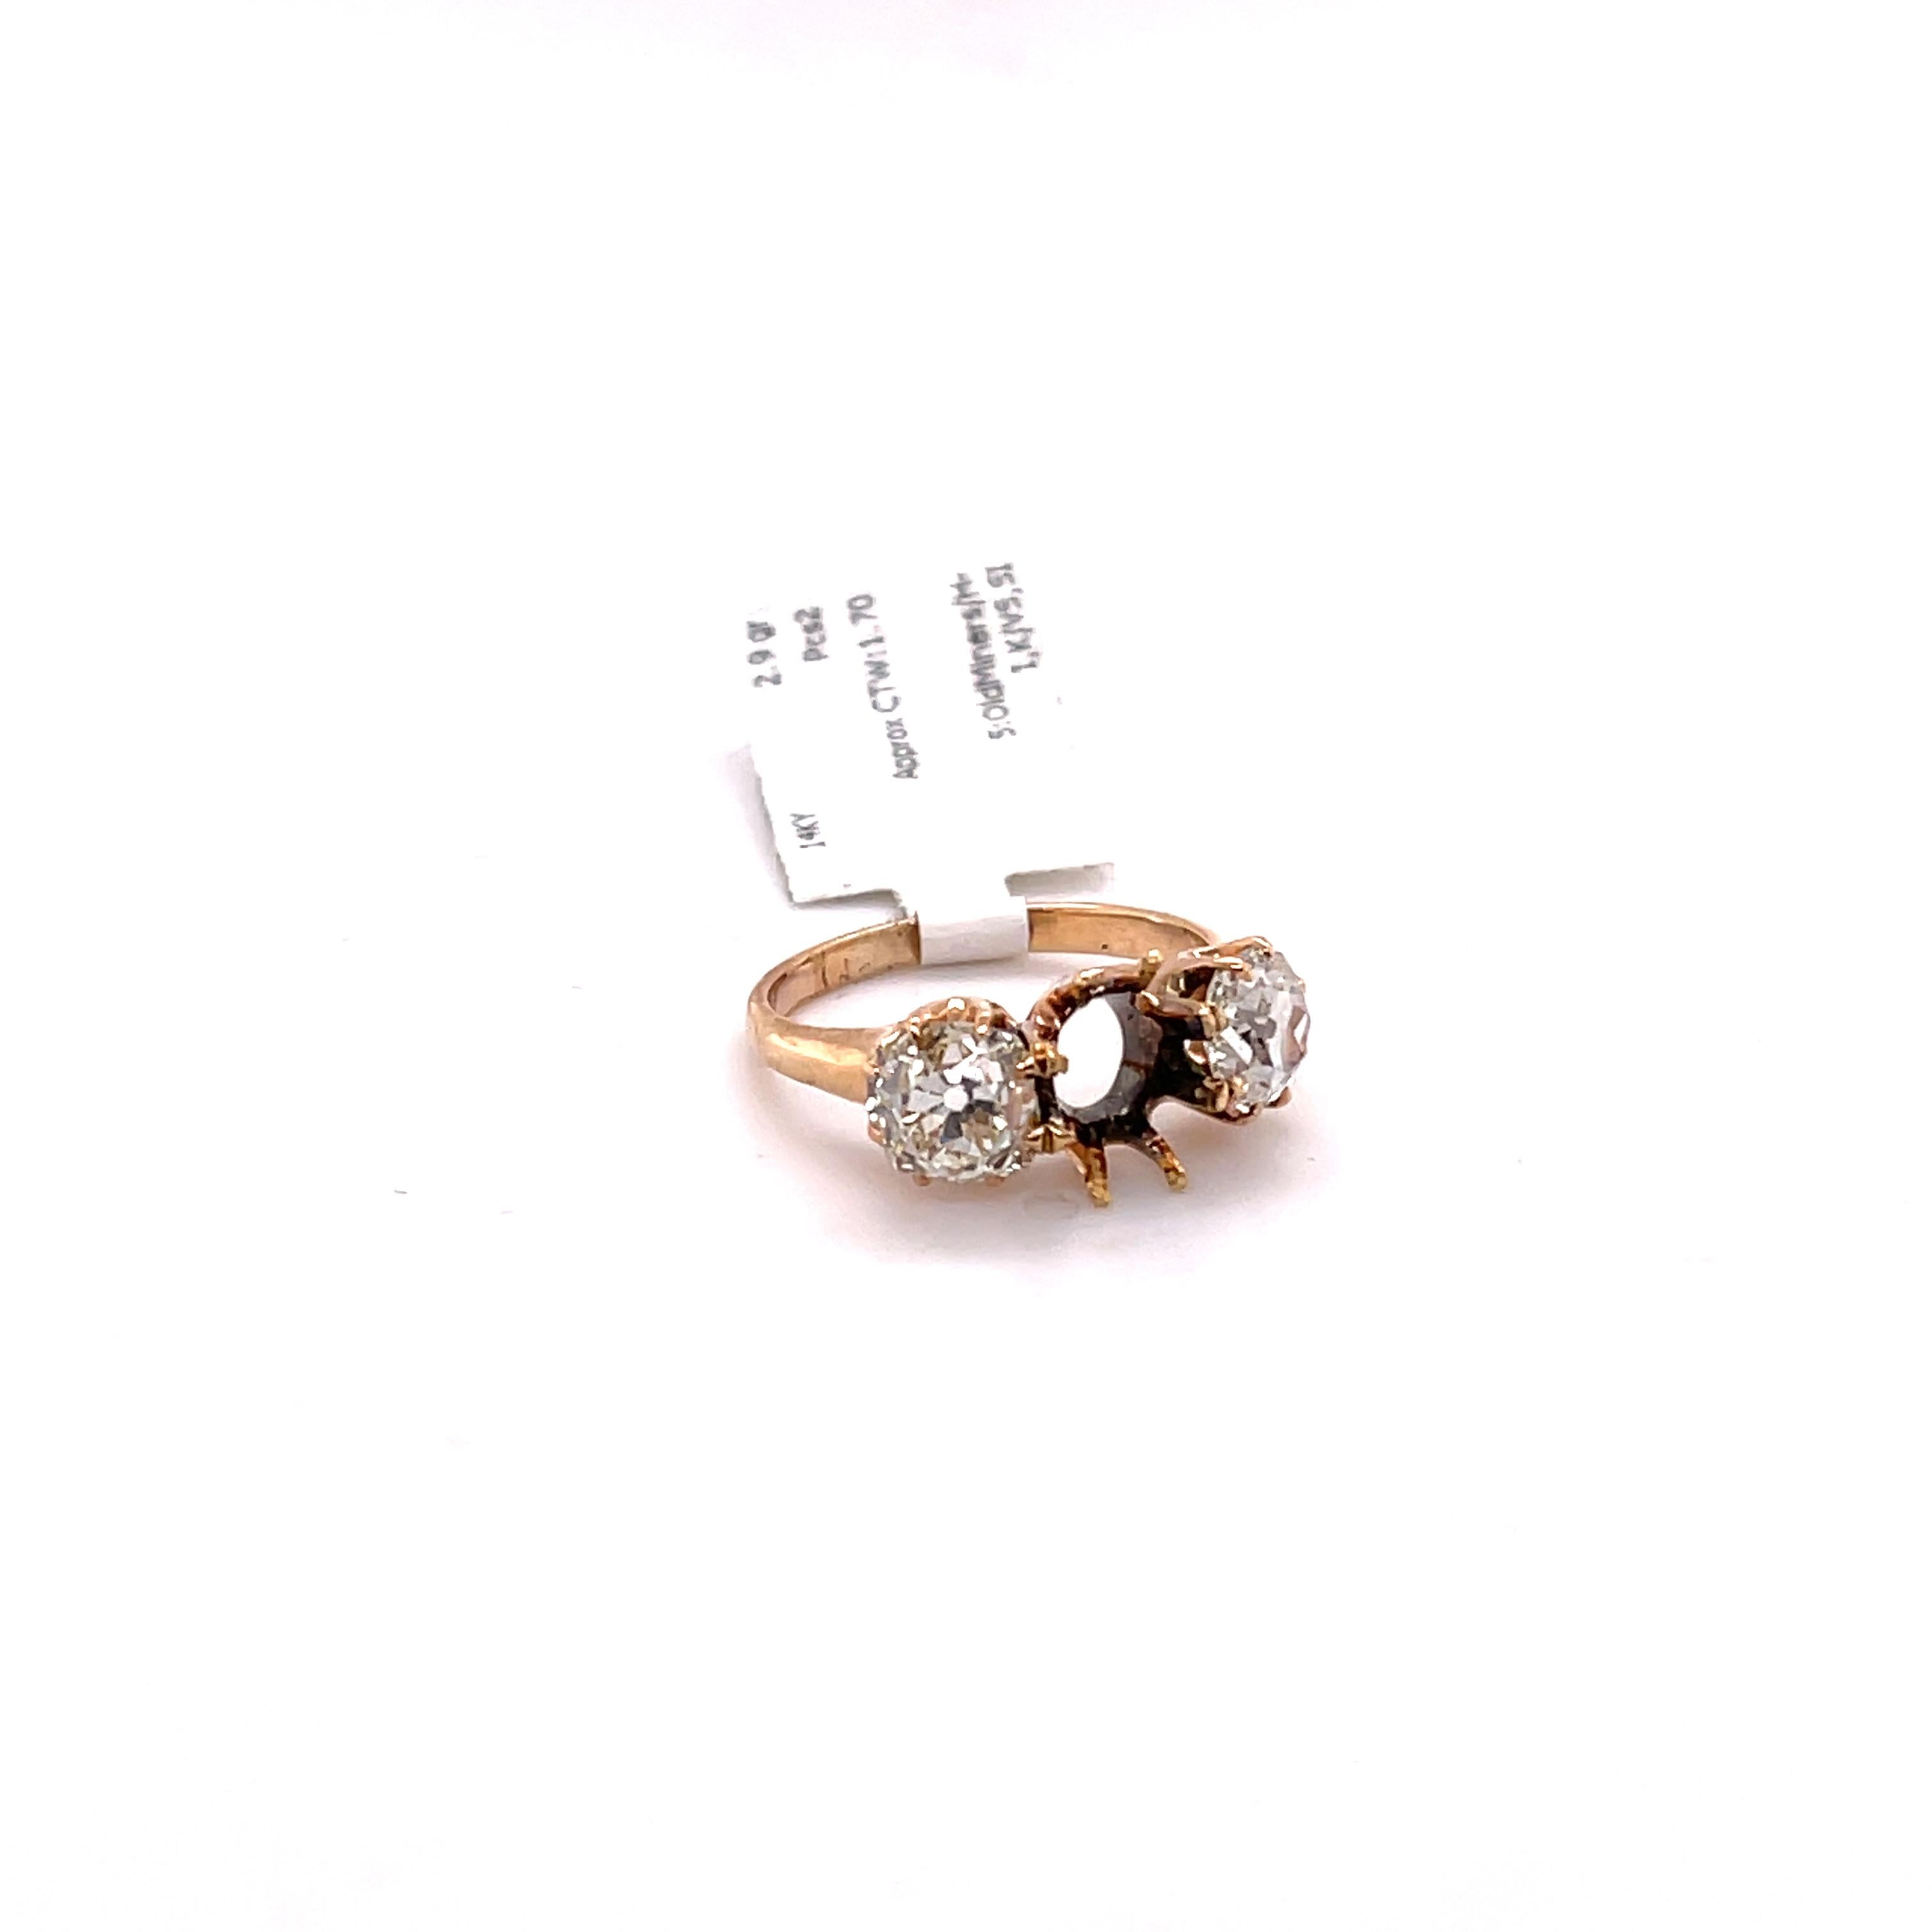 Gender: Ladies
Size: 5 US
Total Weight: 2.9 grams
Purity: 14K Yellow Gold
Ring Diameter: 5.57mm
Shank type: Half Round
Condition: Pre-owned in excellent condition. Quality and Durability was checked by professional jewelers.

8-Prong Set in 14 Karat